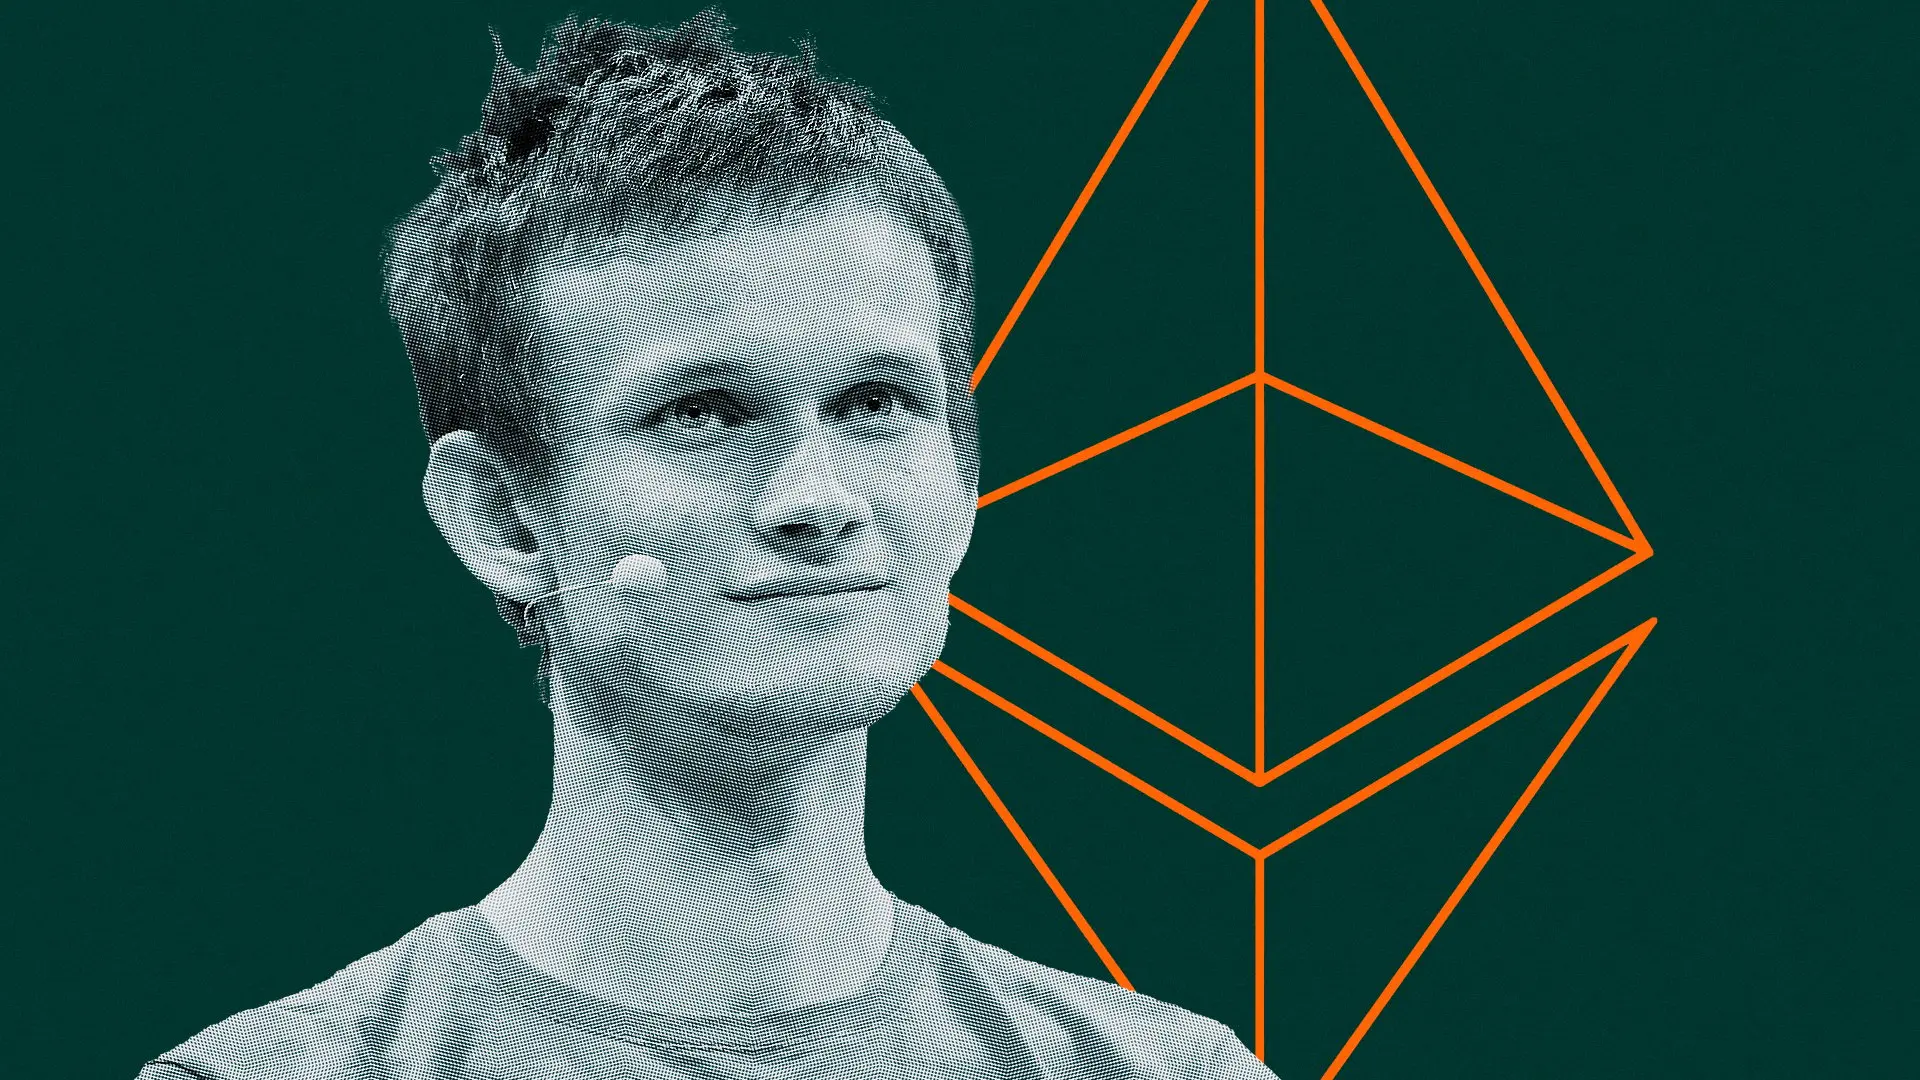 Vitalik Buterin Quickly Drafts Well-Received Ethereum Wallet Improvement Proposal